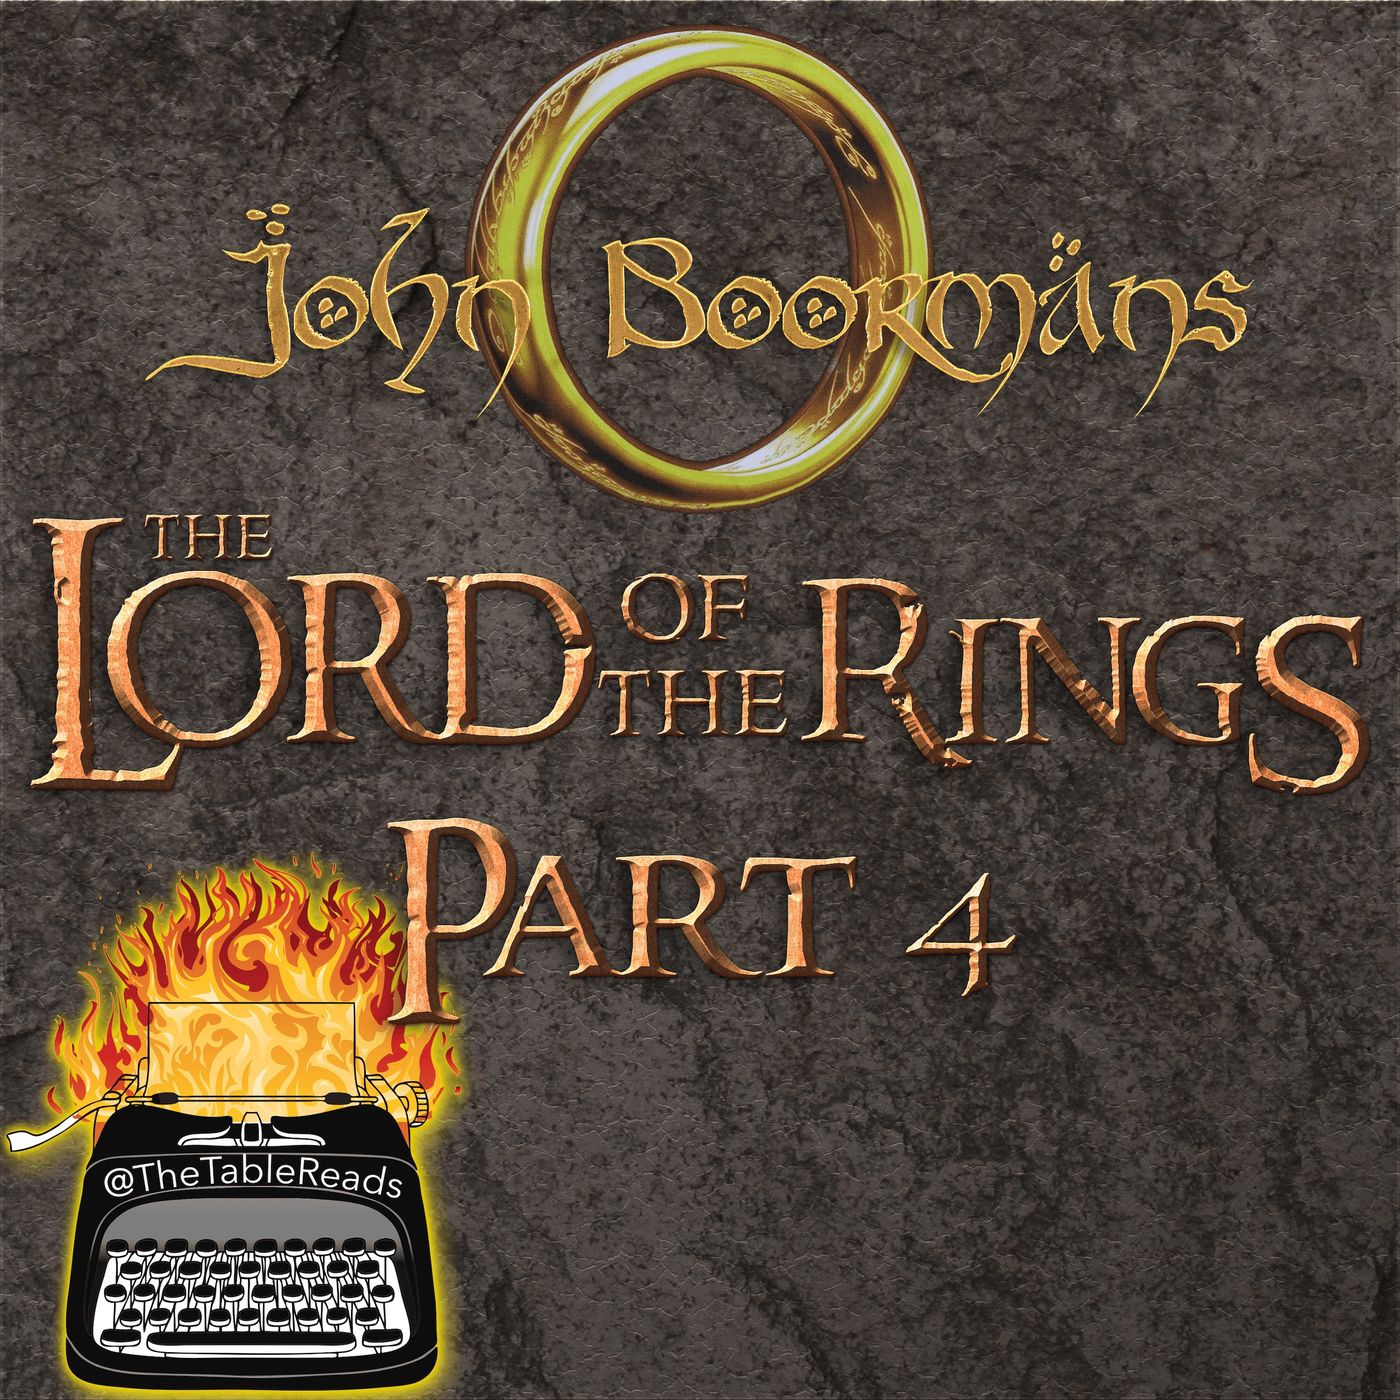 103 - John Boorman’s Lord of the Rings, Part 4